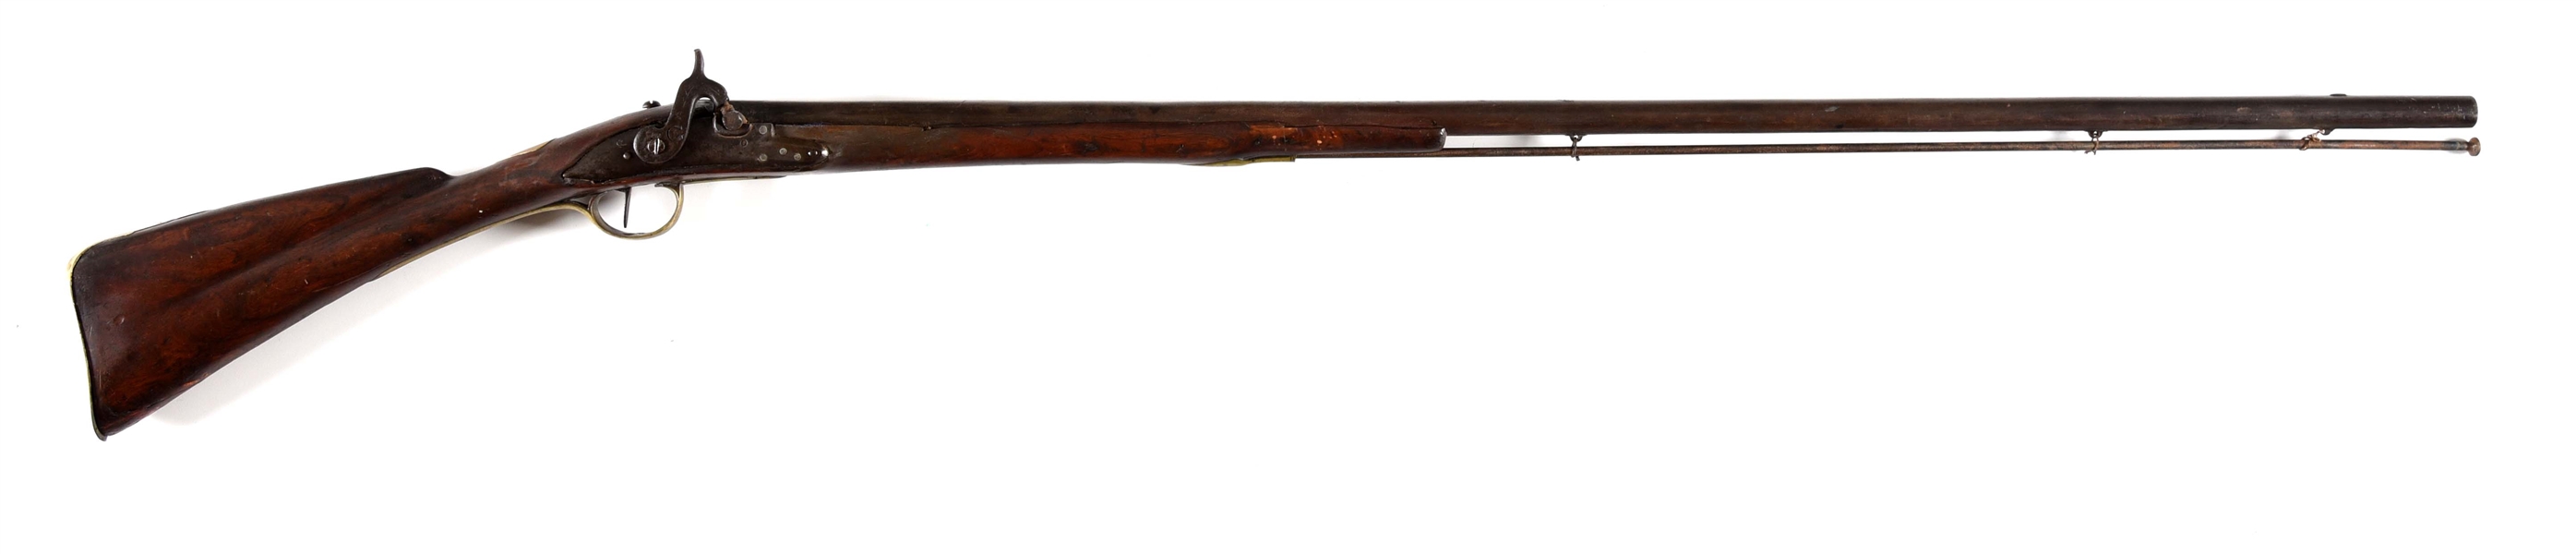 (A) AMERICAN PERCUSSION MUSKET.